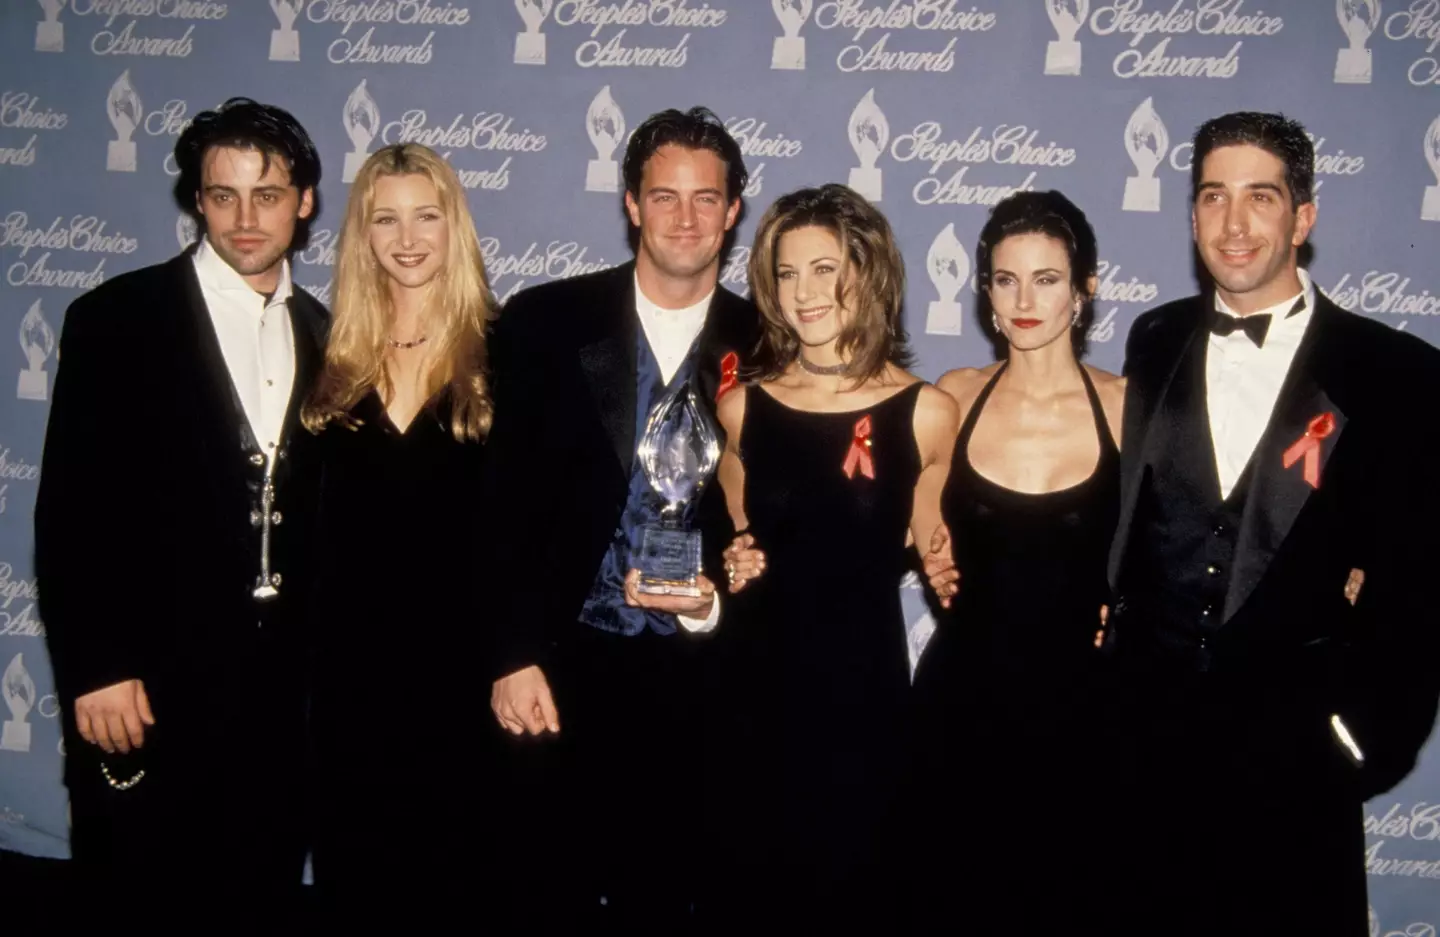 Courteney Cox paid tribute to Matthew Perry.